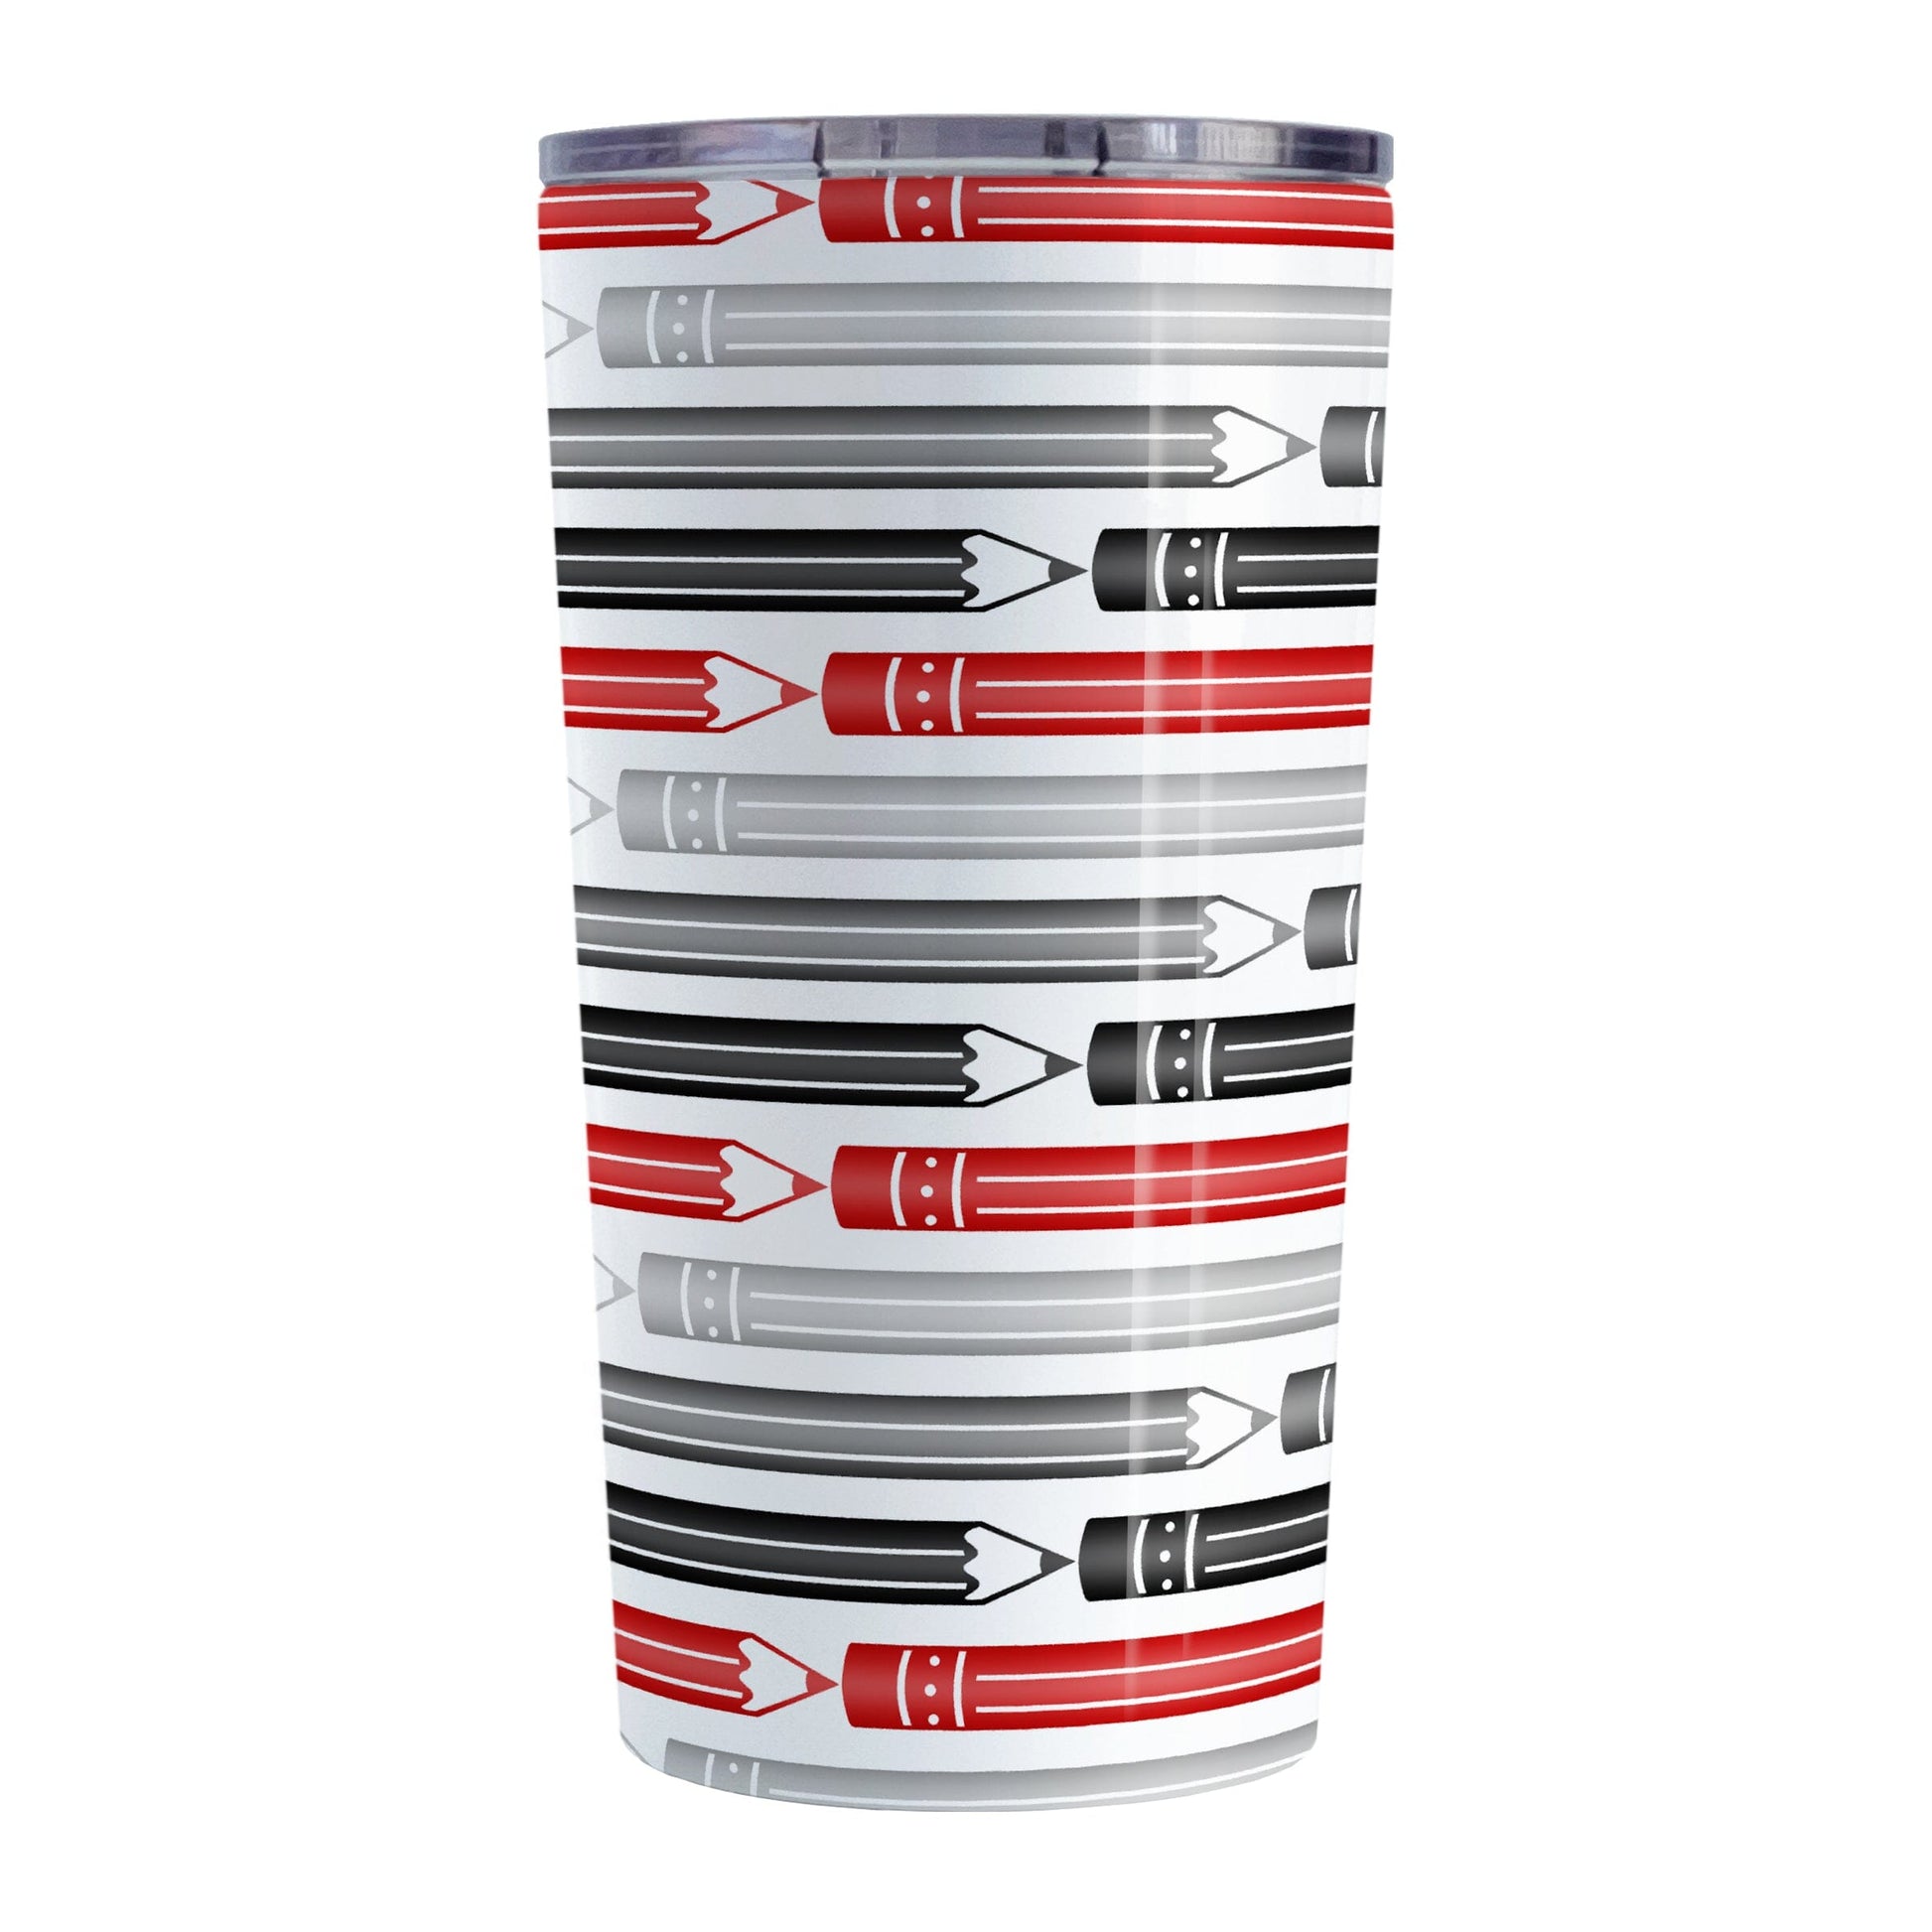 Red Gray Black Pencils Pattern Tumbler Cup (20oz) at Amy's Coffee Mugs. A stainless steel tumbler cup designed with a horizontal pencils in red, gray, and black, stacked in a pattern that wraps around the cup.